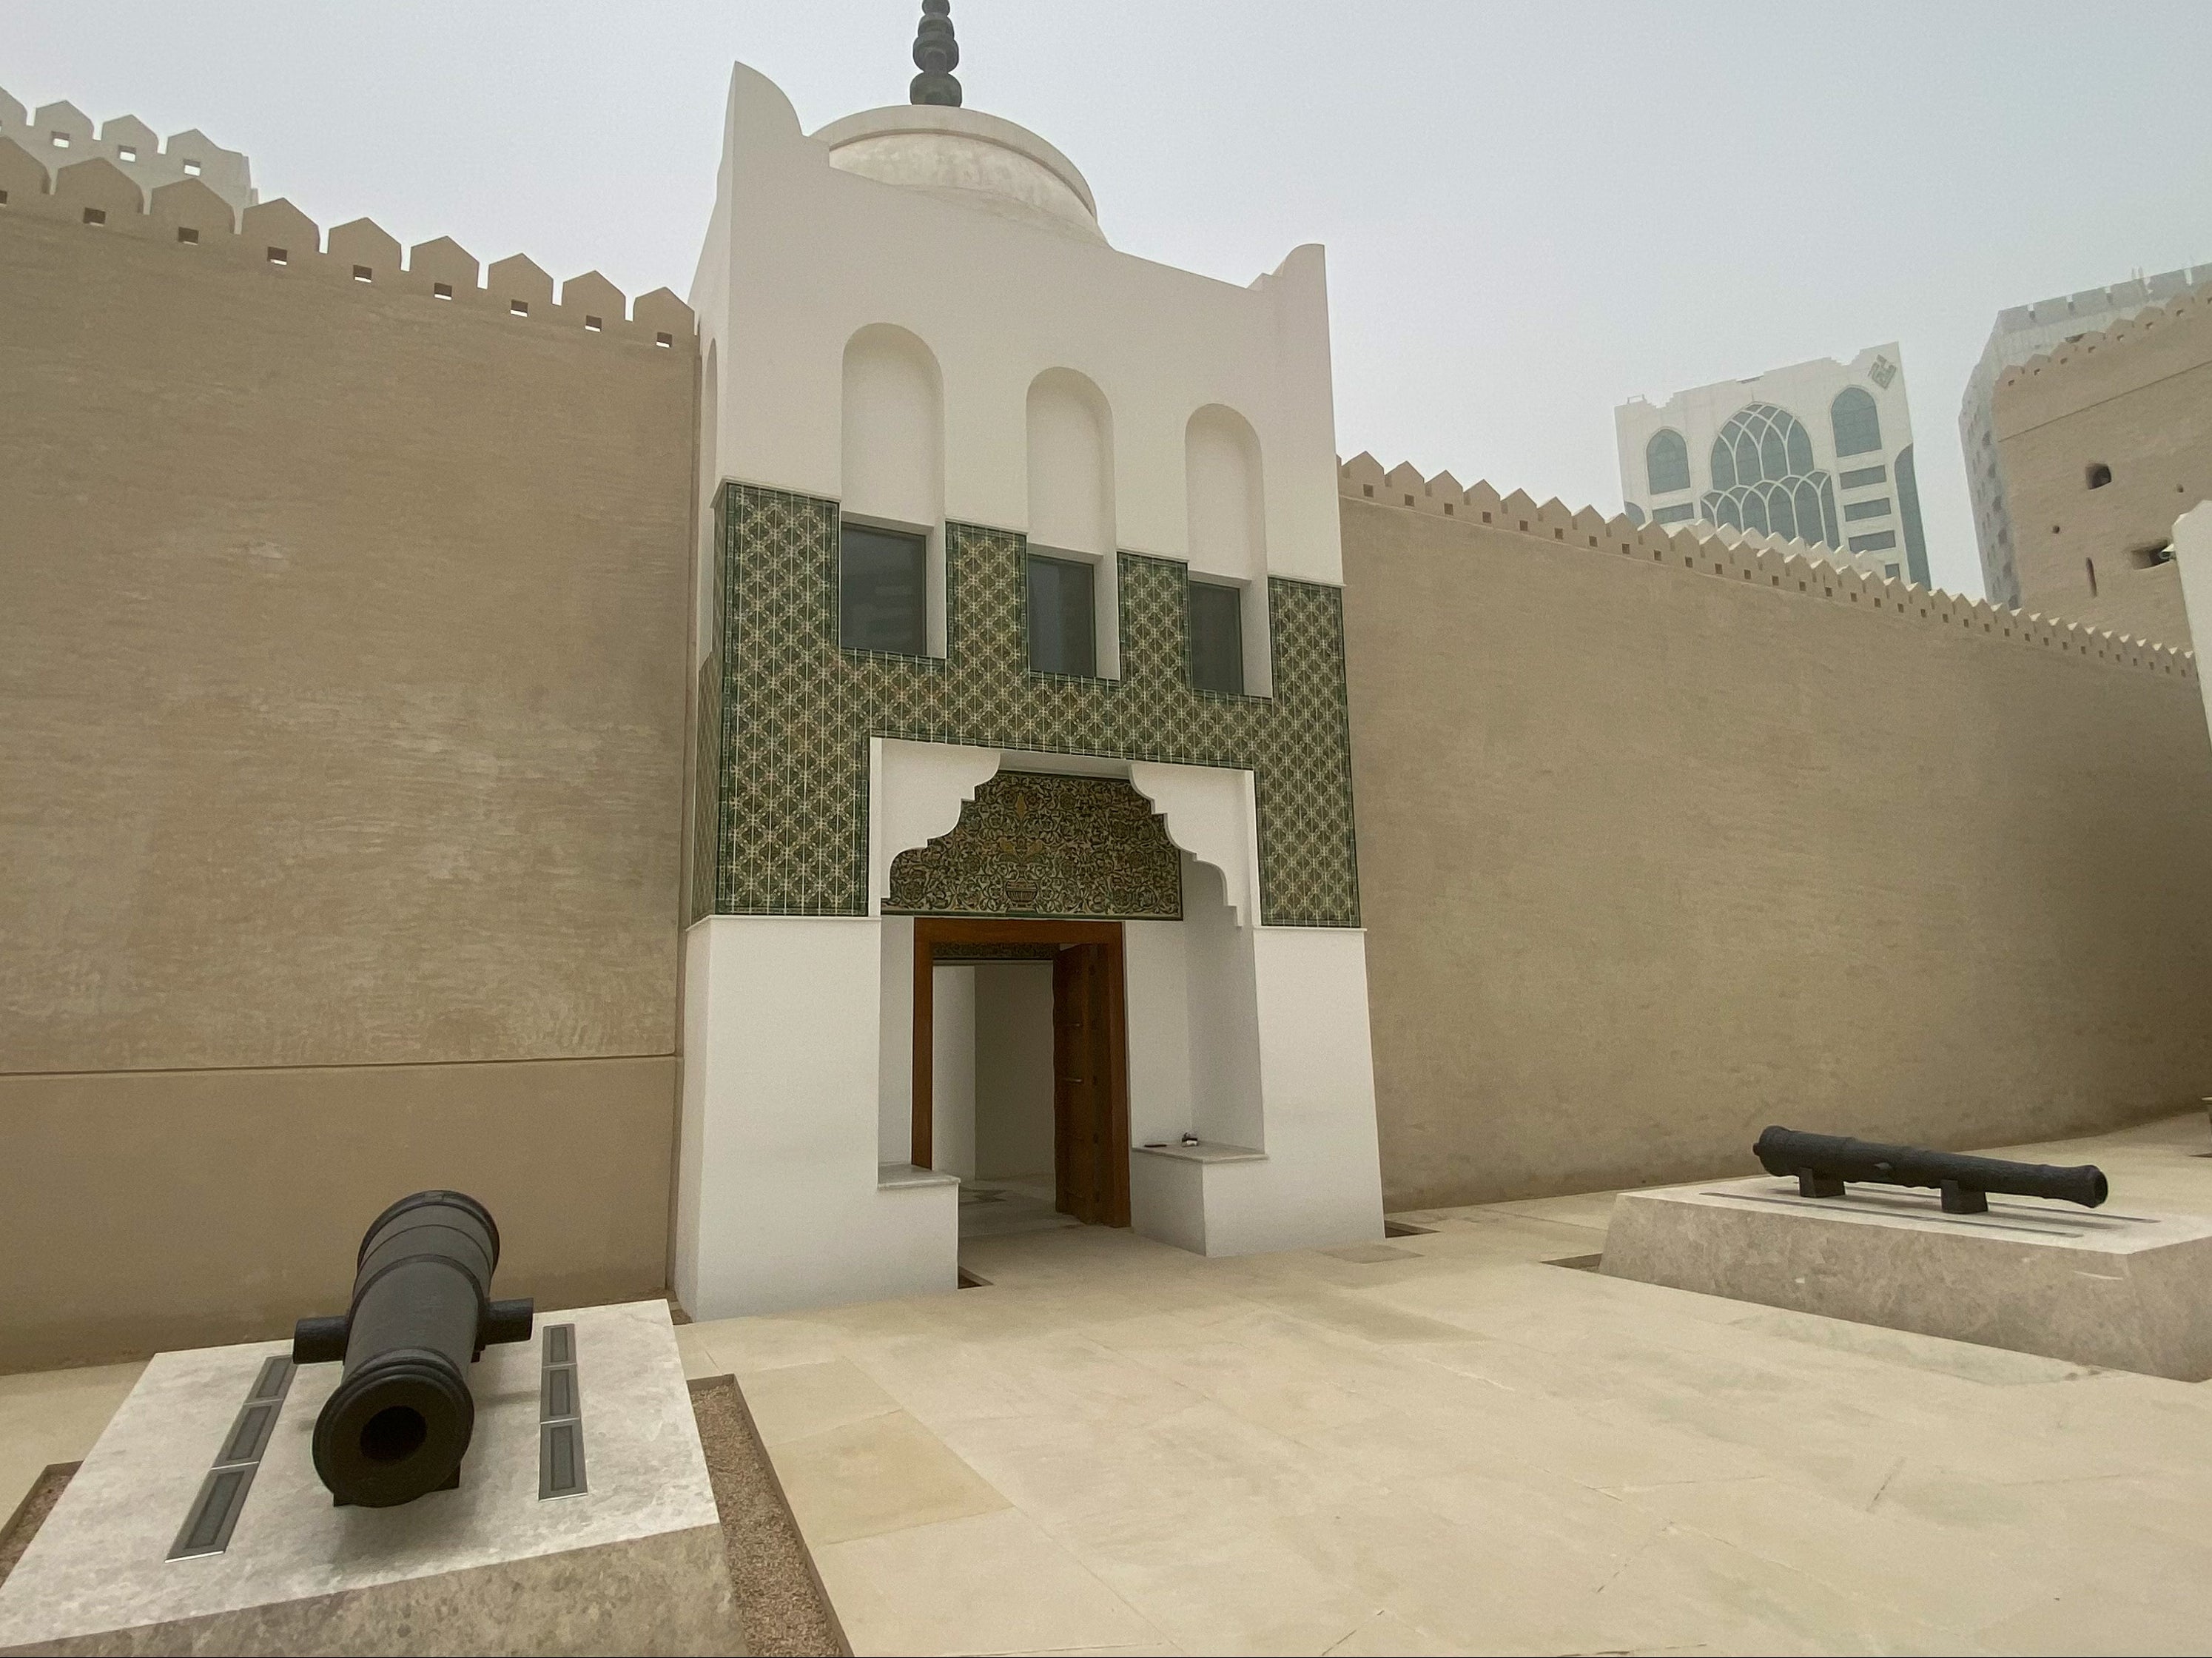 The Qasr Al-Hosn is the oldest stone building in the UAE